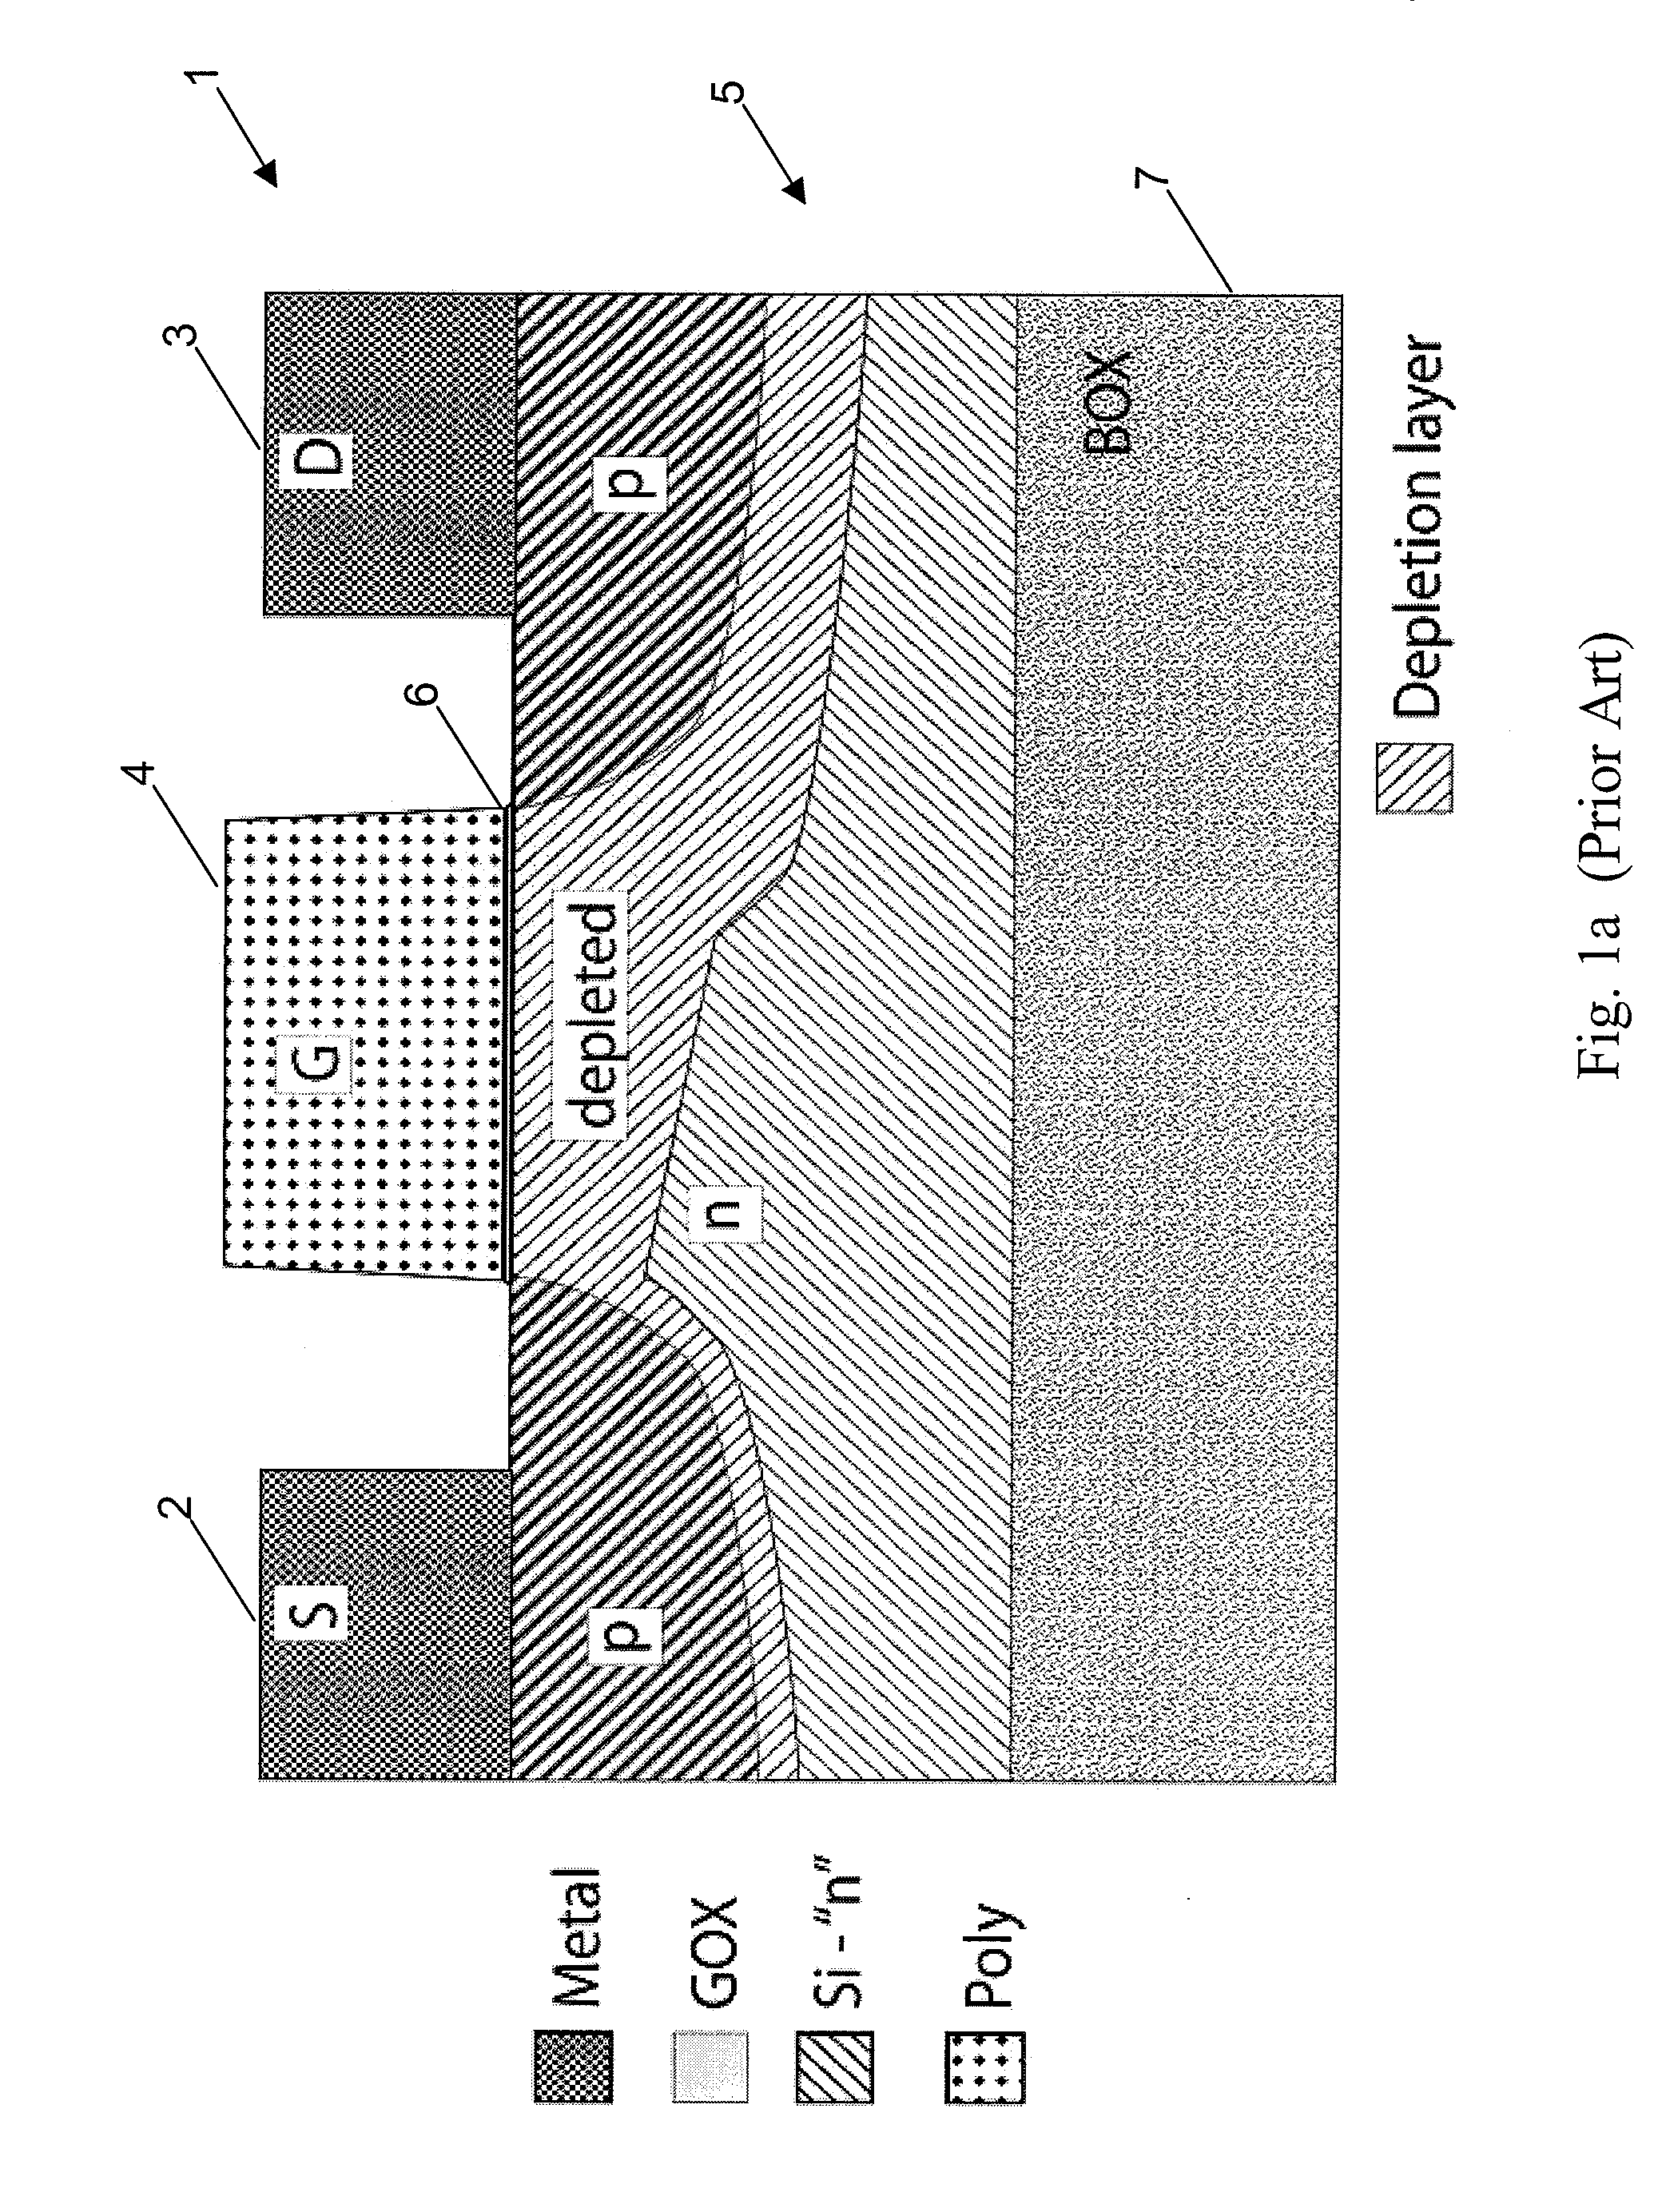 Integrated circuit device, system, and method of fabrication